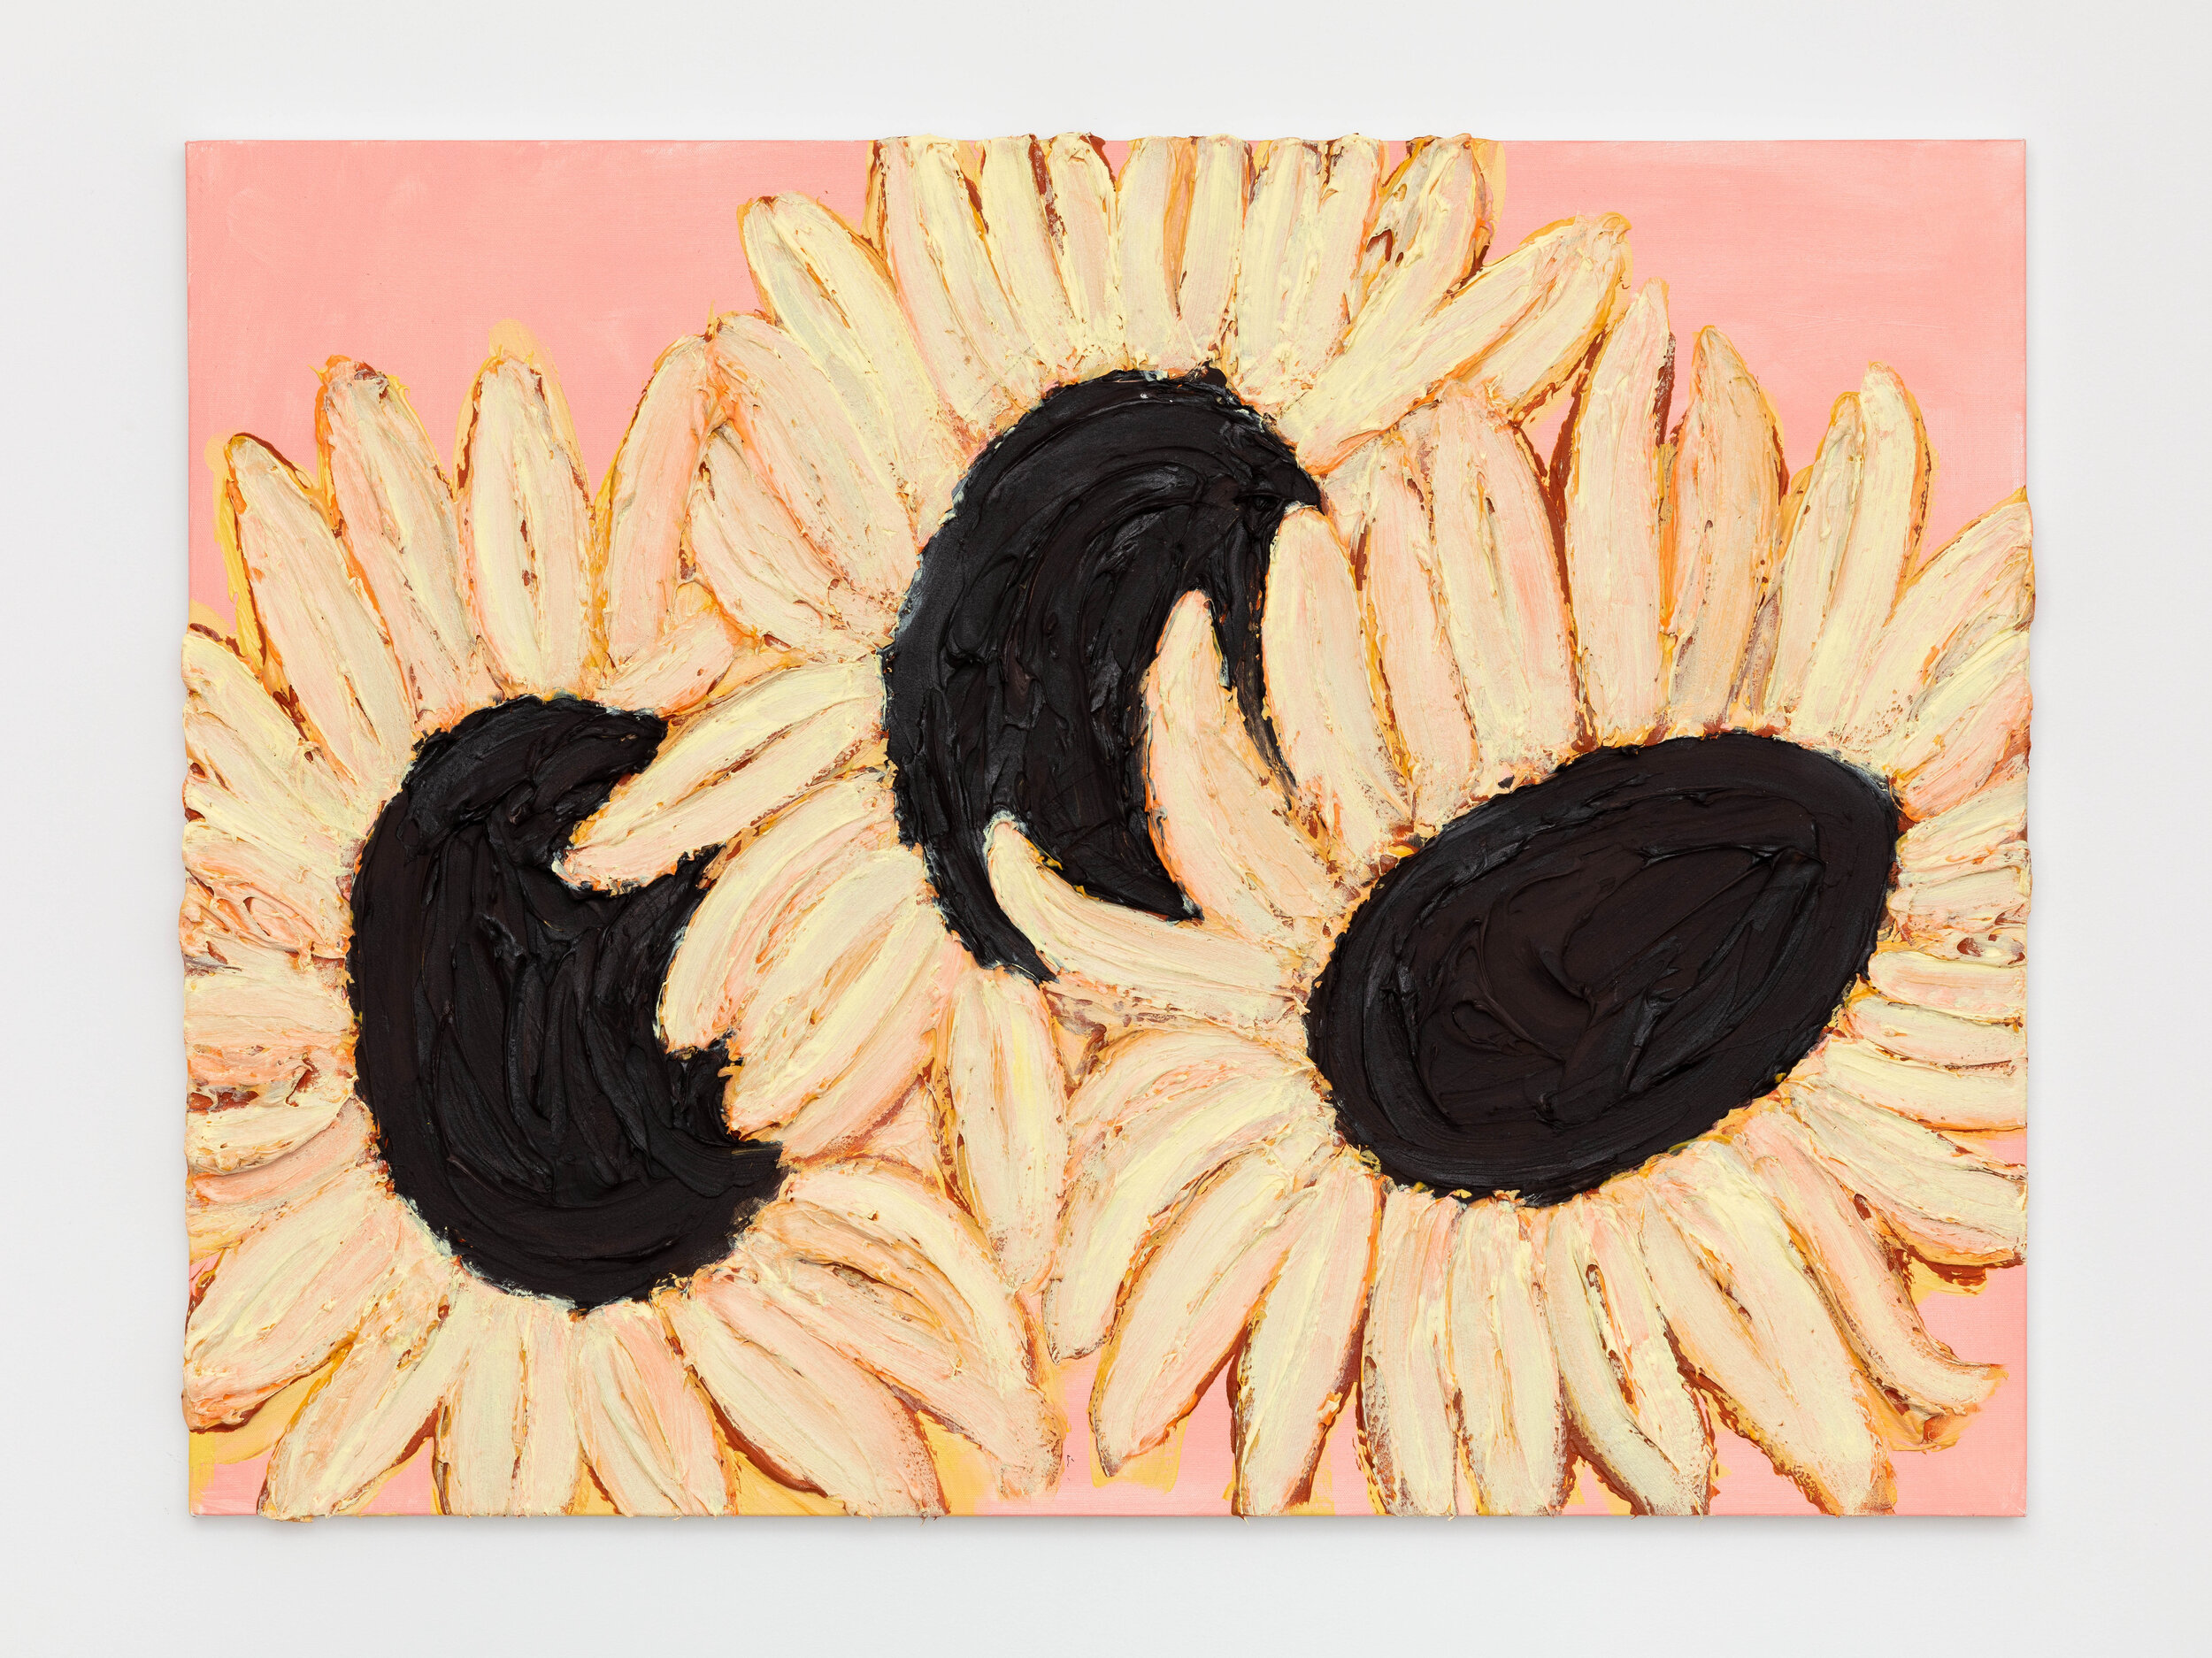   Alex Nguyen-Vo   Three Sunflowers, May-June  May 2020 Acrylic on canvas  24 x 30 inches 